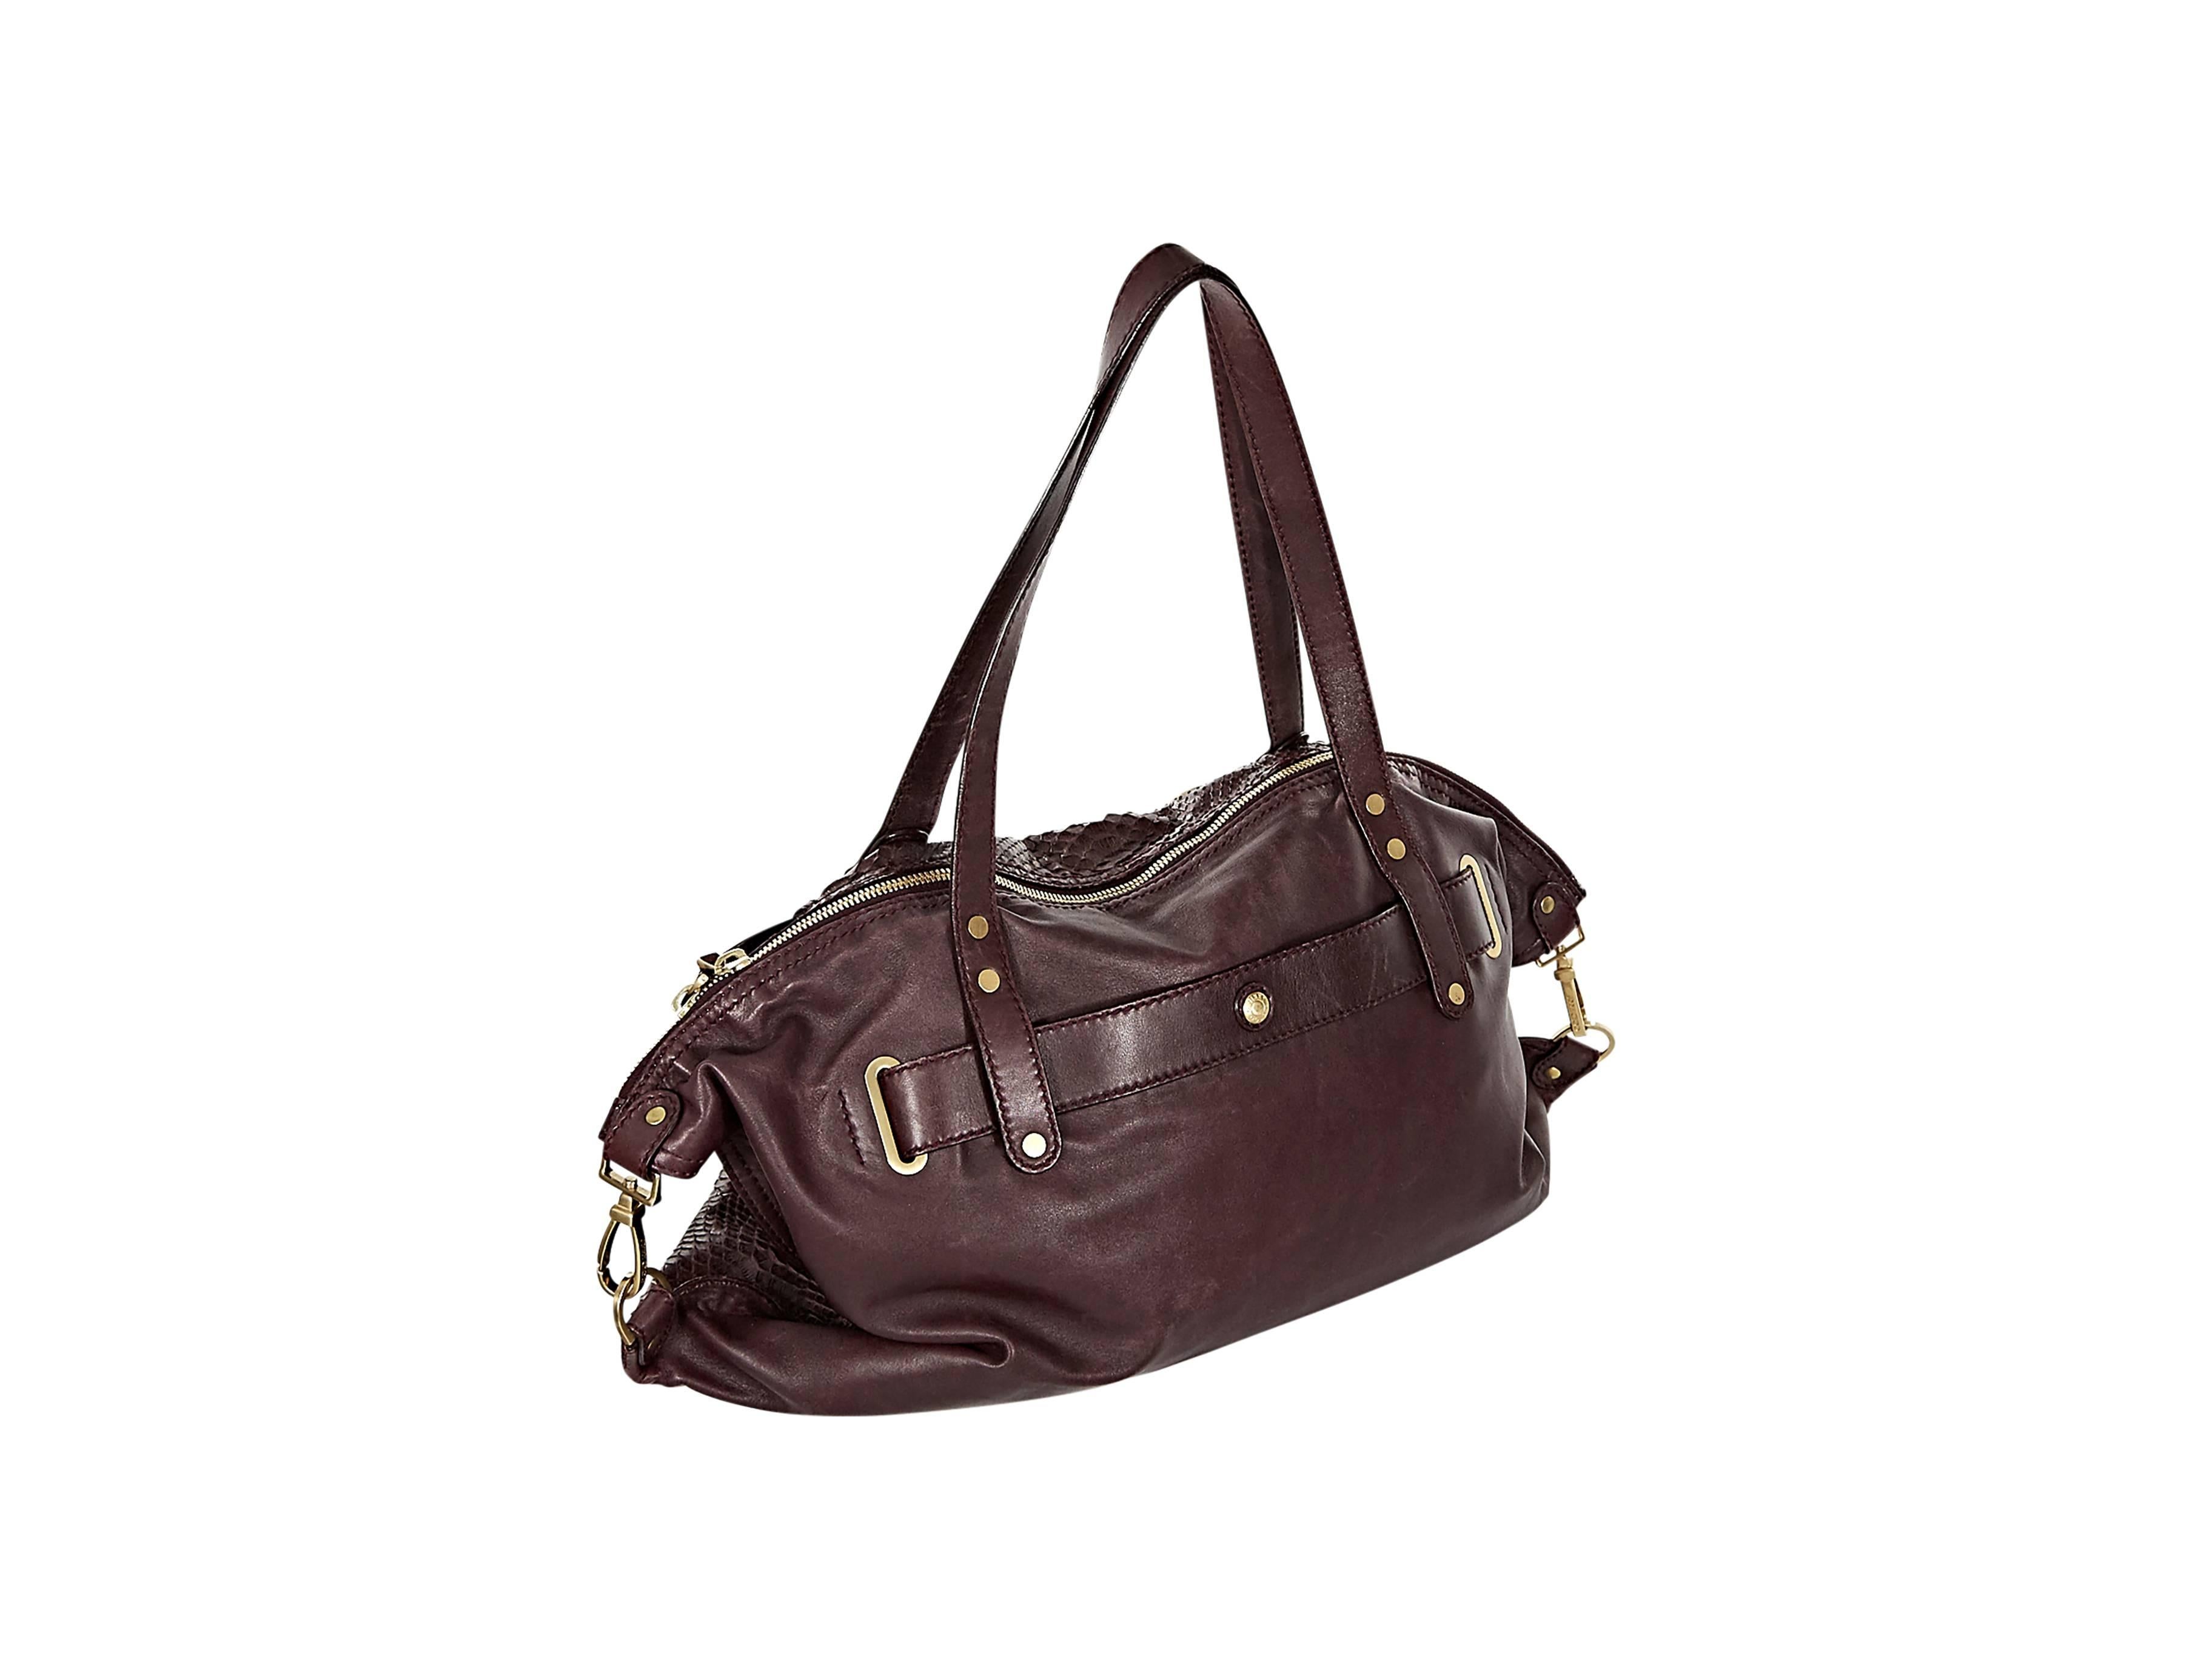 Purple python satchel by Jimmy Choo.  Double shoulder straps.  Top zip closure.  Side buckle details.  Lined interior with inner pockets.  Goldtone hardware. 